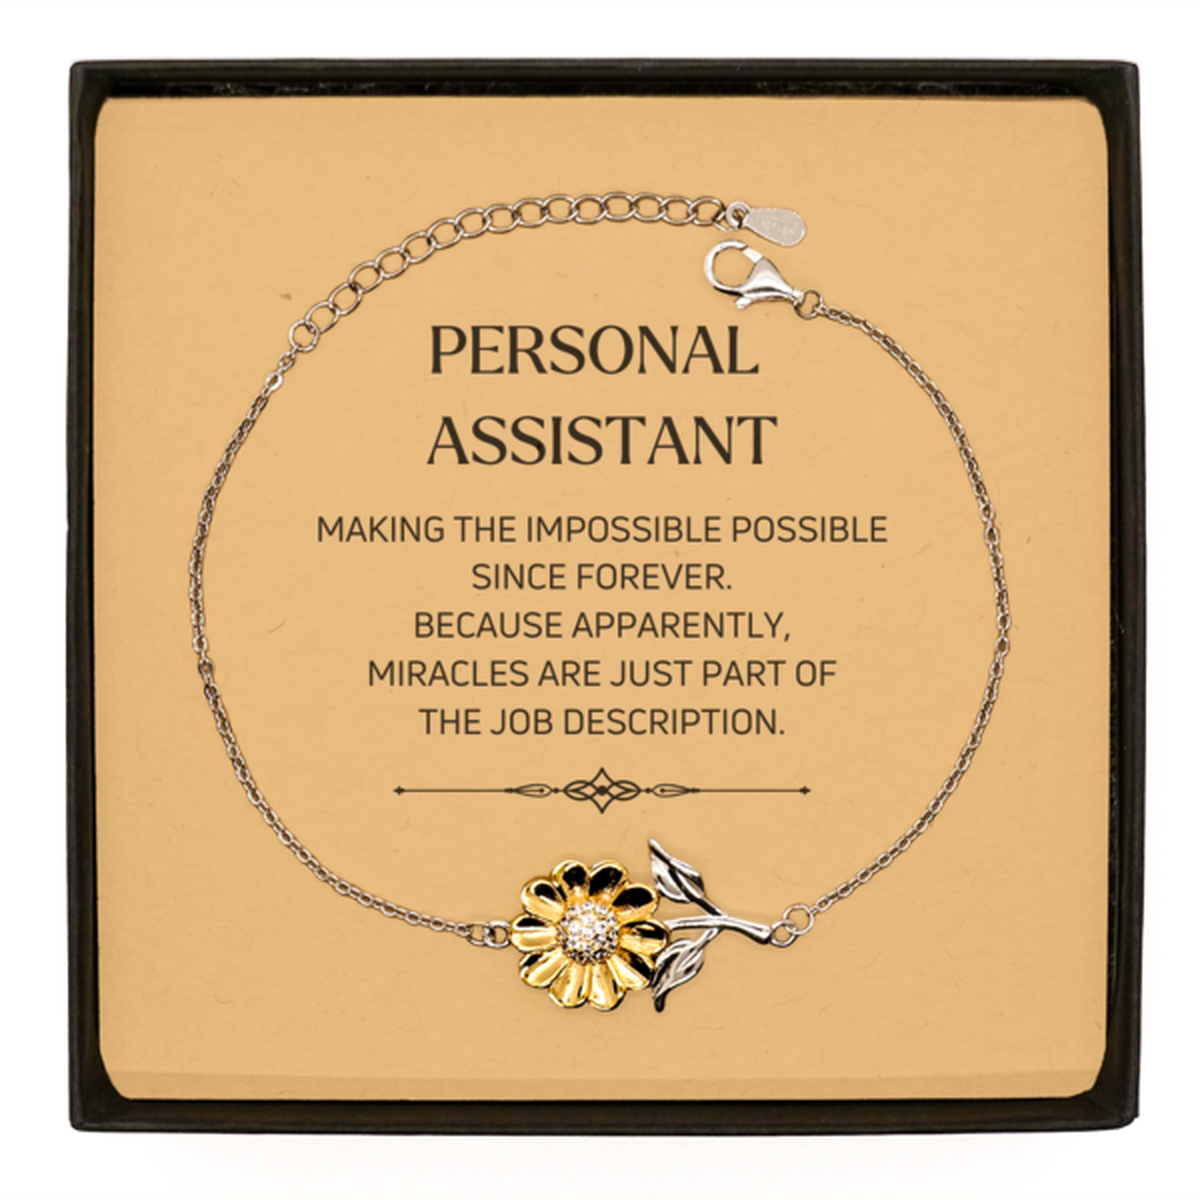 Funny Personal Assistant Gifts, Miracles are just part of the job description, Inspirational Birthday Sunflower Bracelet For Personal Assistant, Men, Women, Coworkers, Friends, Boss